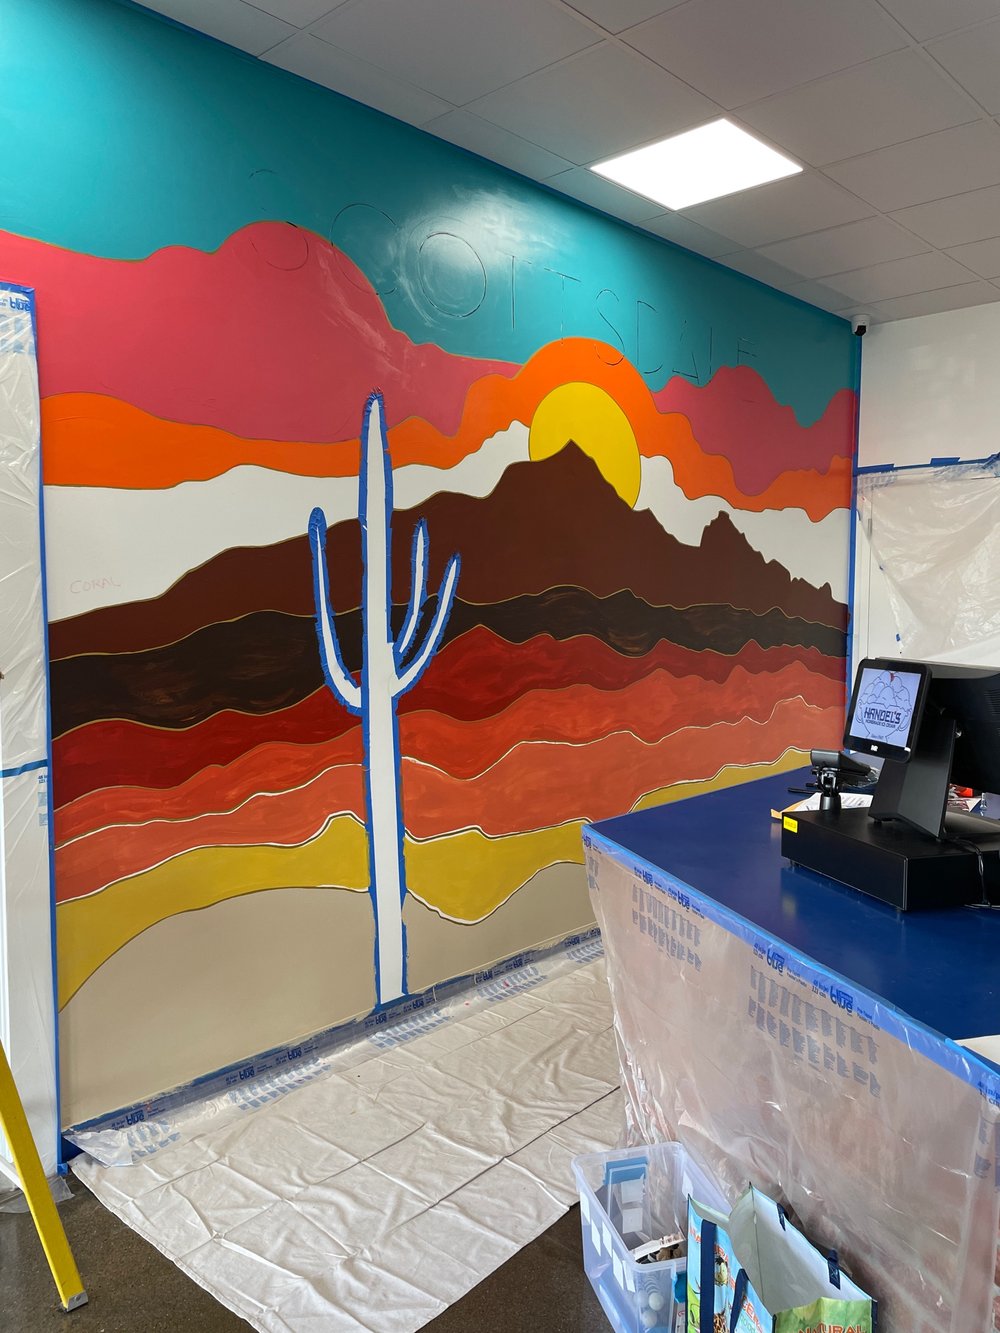  mural progress, end of day 3 